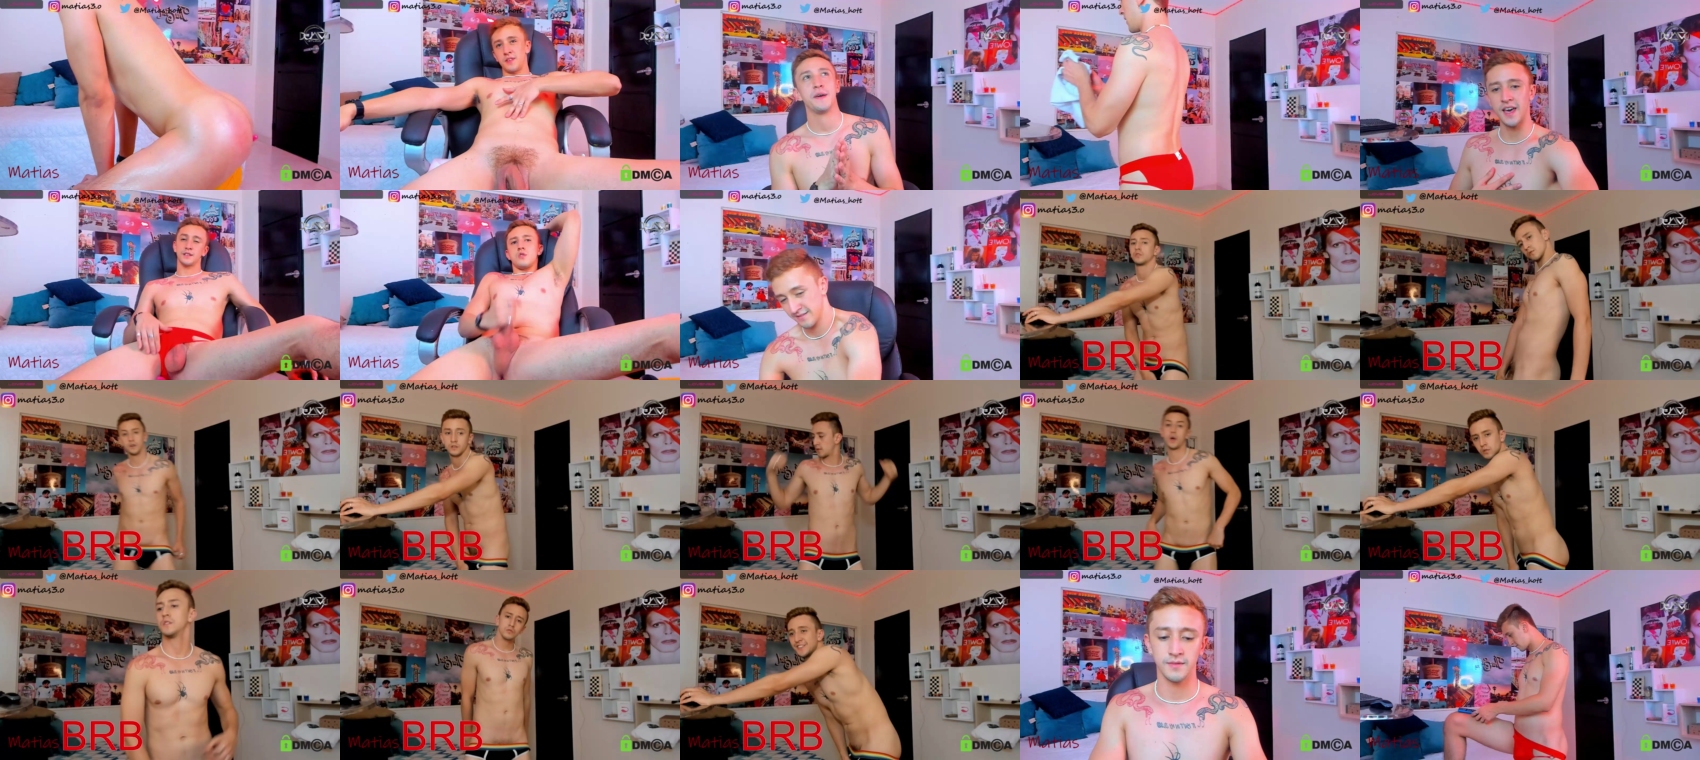 twink_blonde1  29-01-2022 video Naked